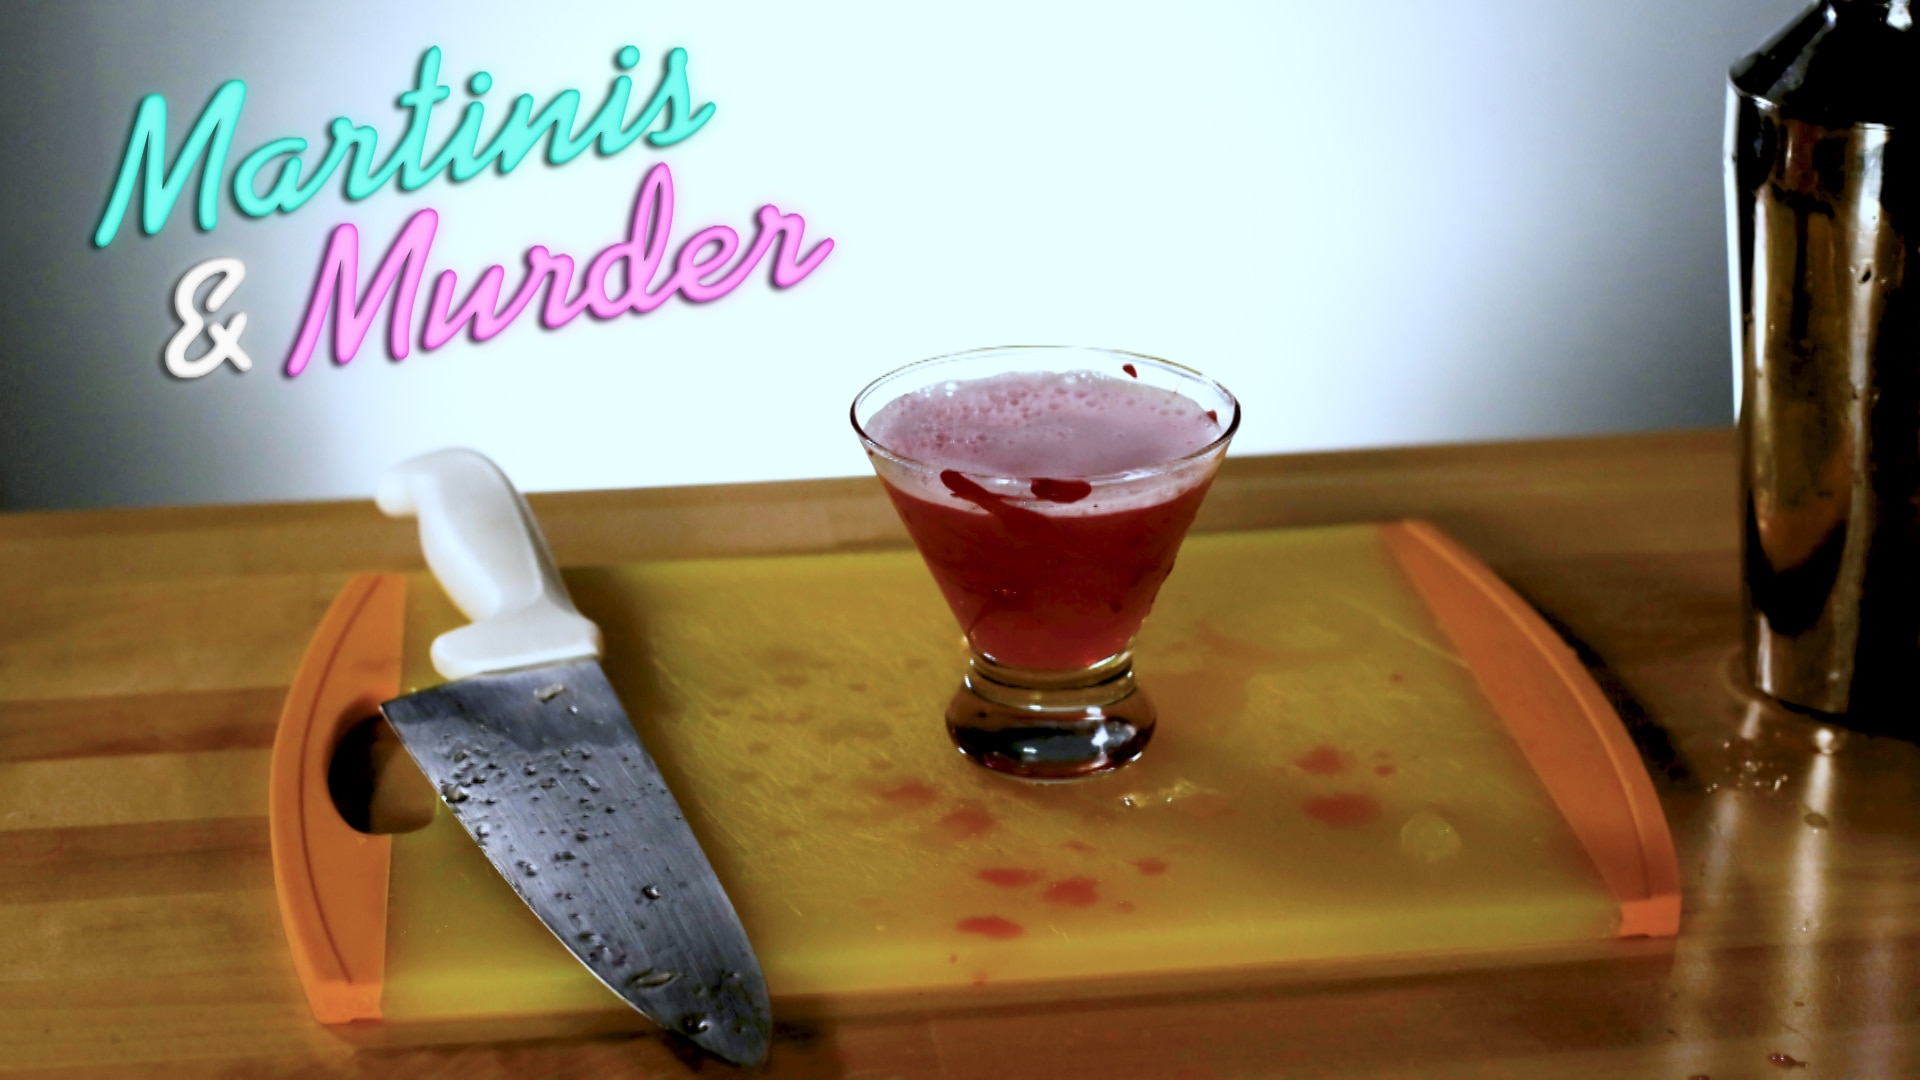 For The Bees - Martinis & Murder Episode #111